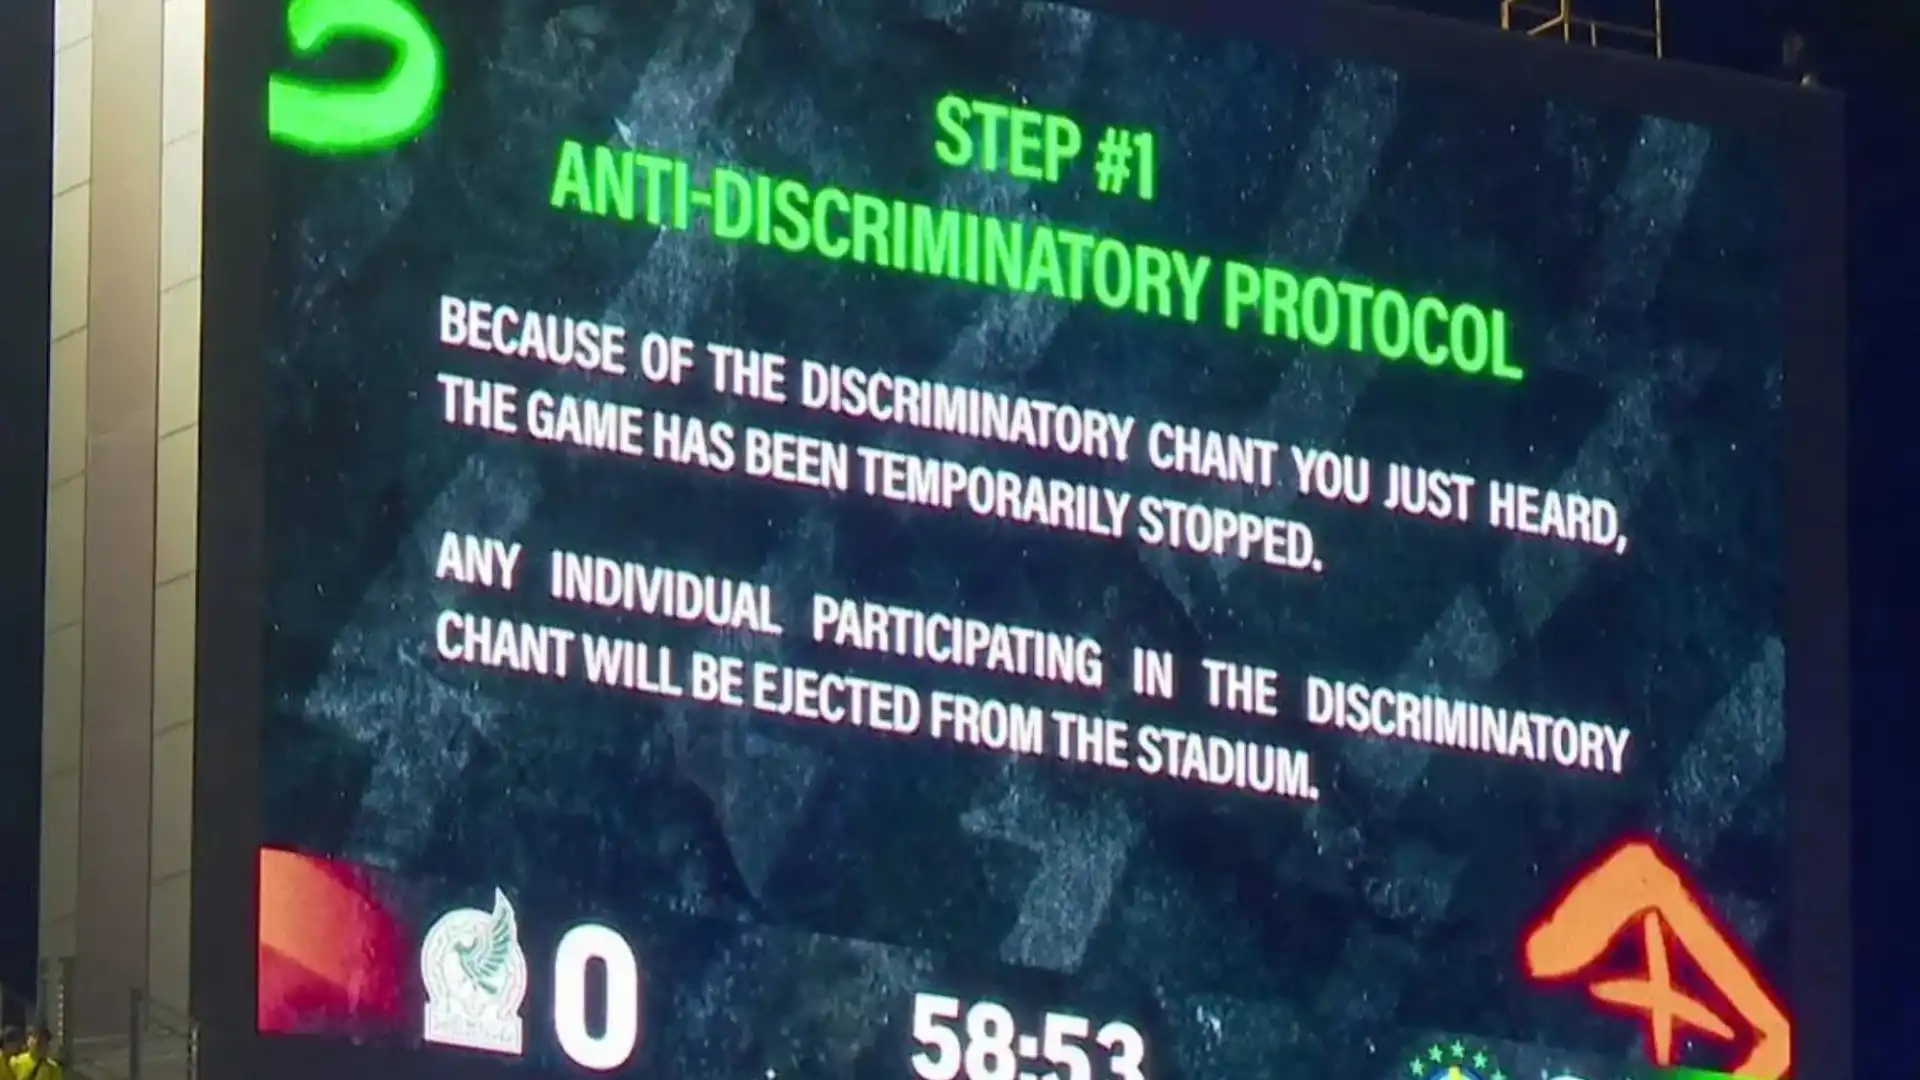 Brazil Mexico game suspended homophobic chanting fans warning